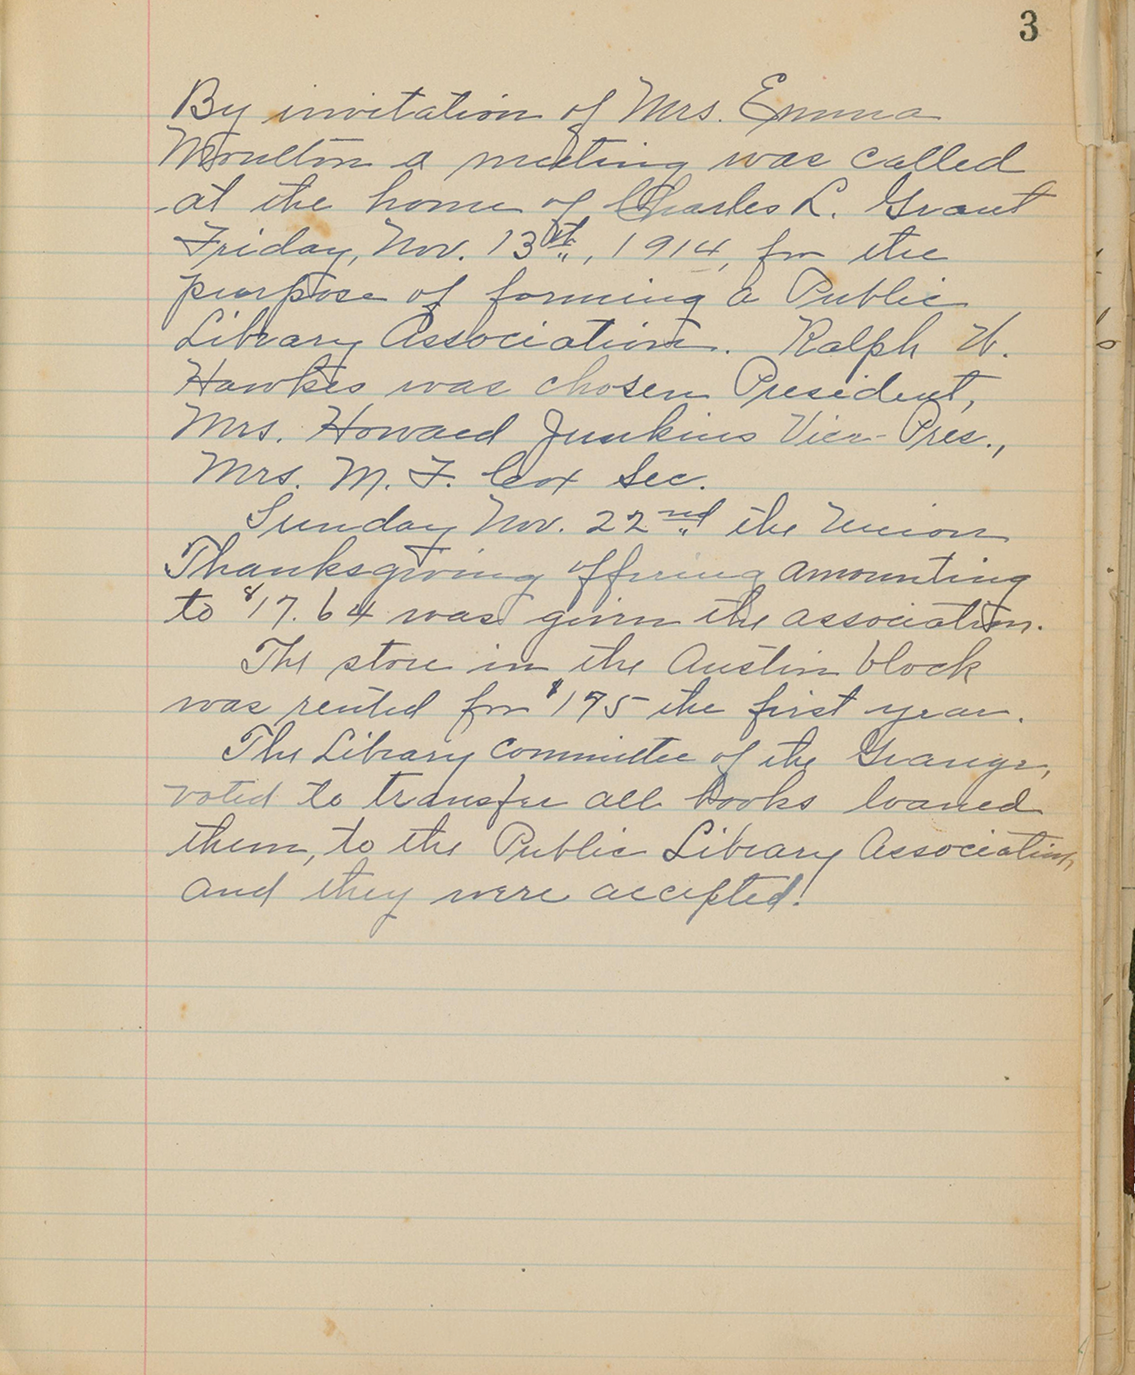 1914 Meeting Notes